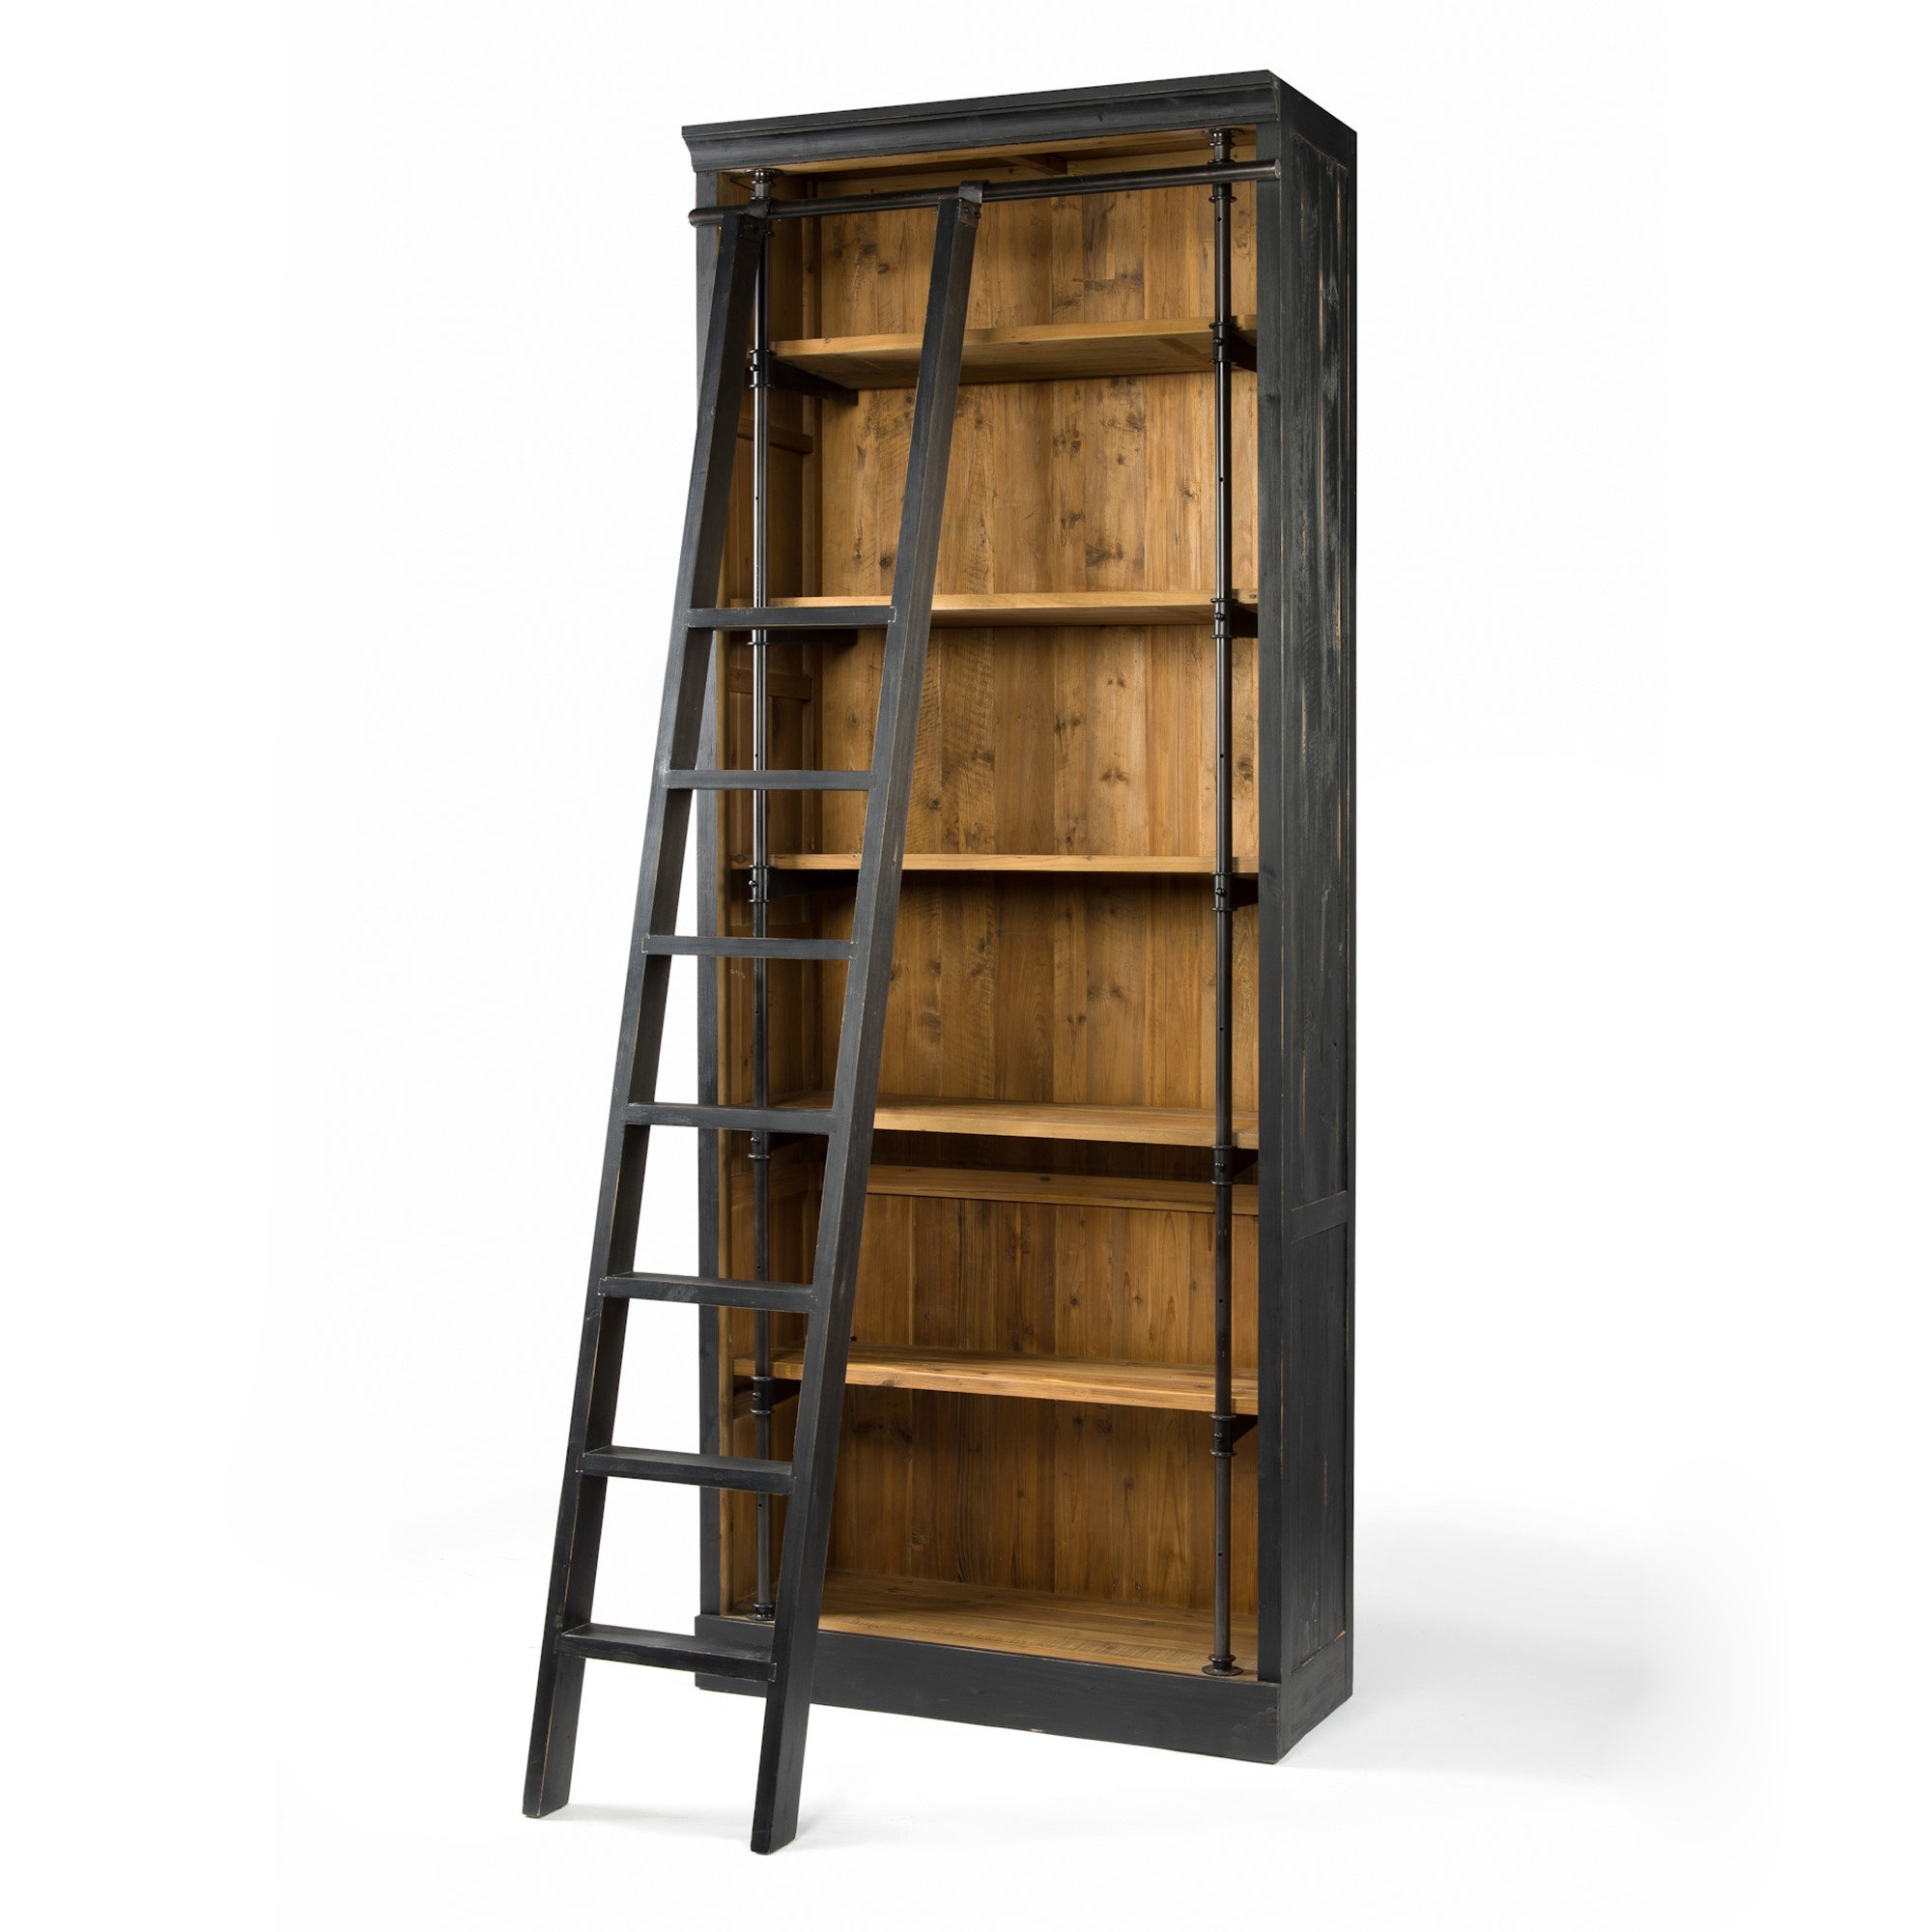 Distressed black wooden bookcase and ladder with stained wooden interior  $2899.00